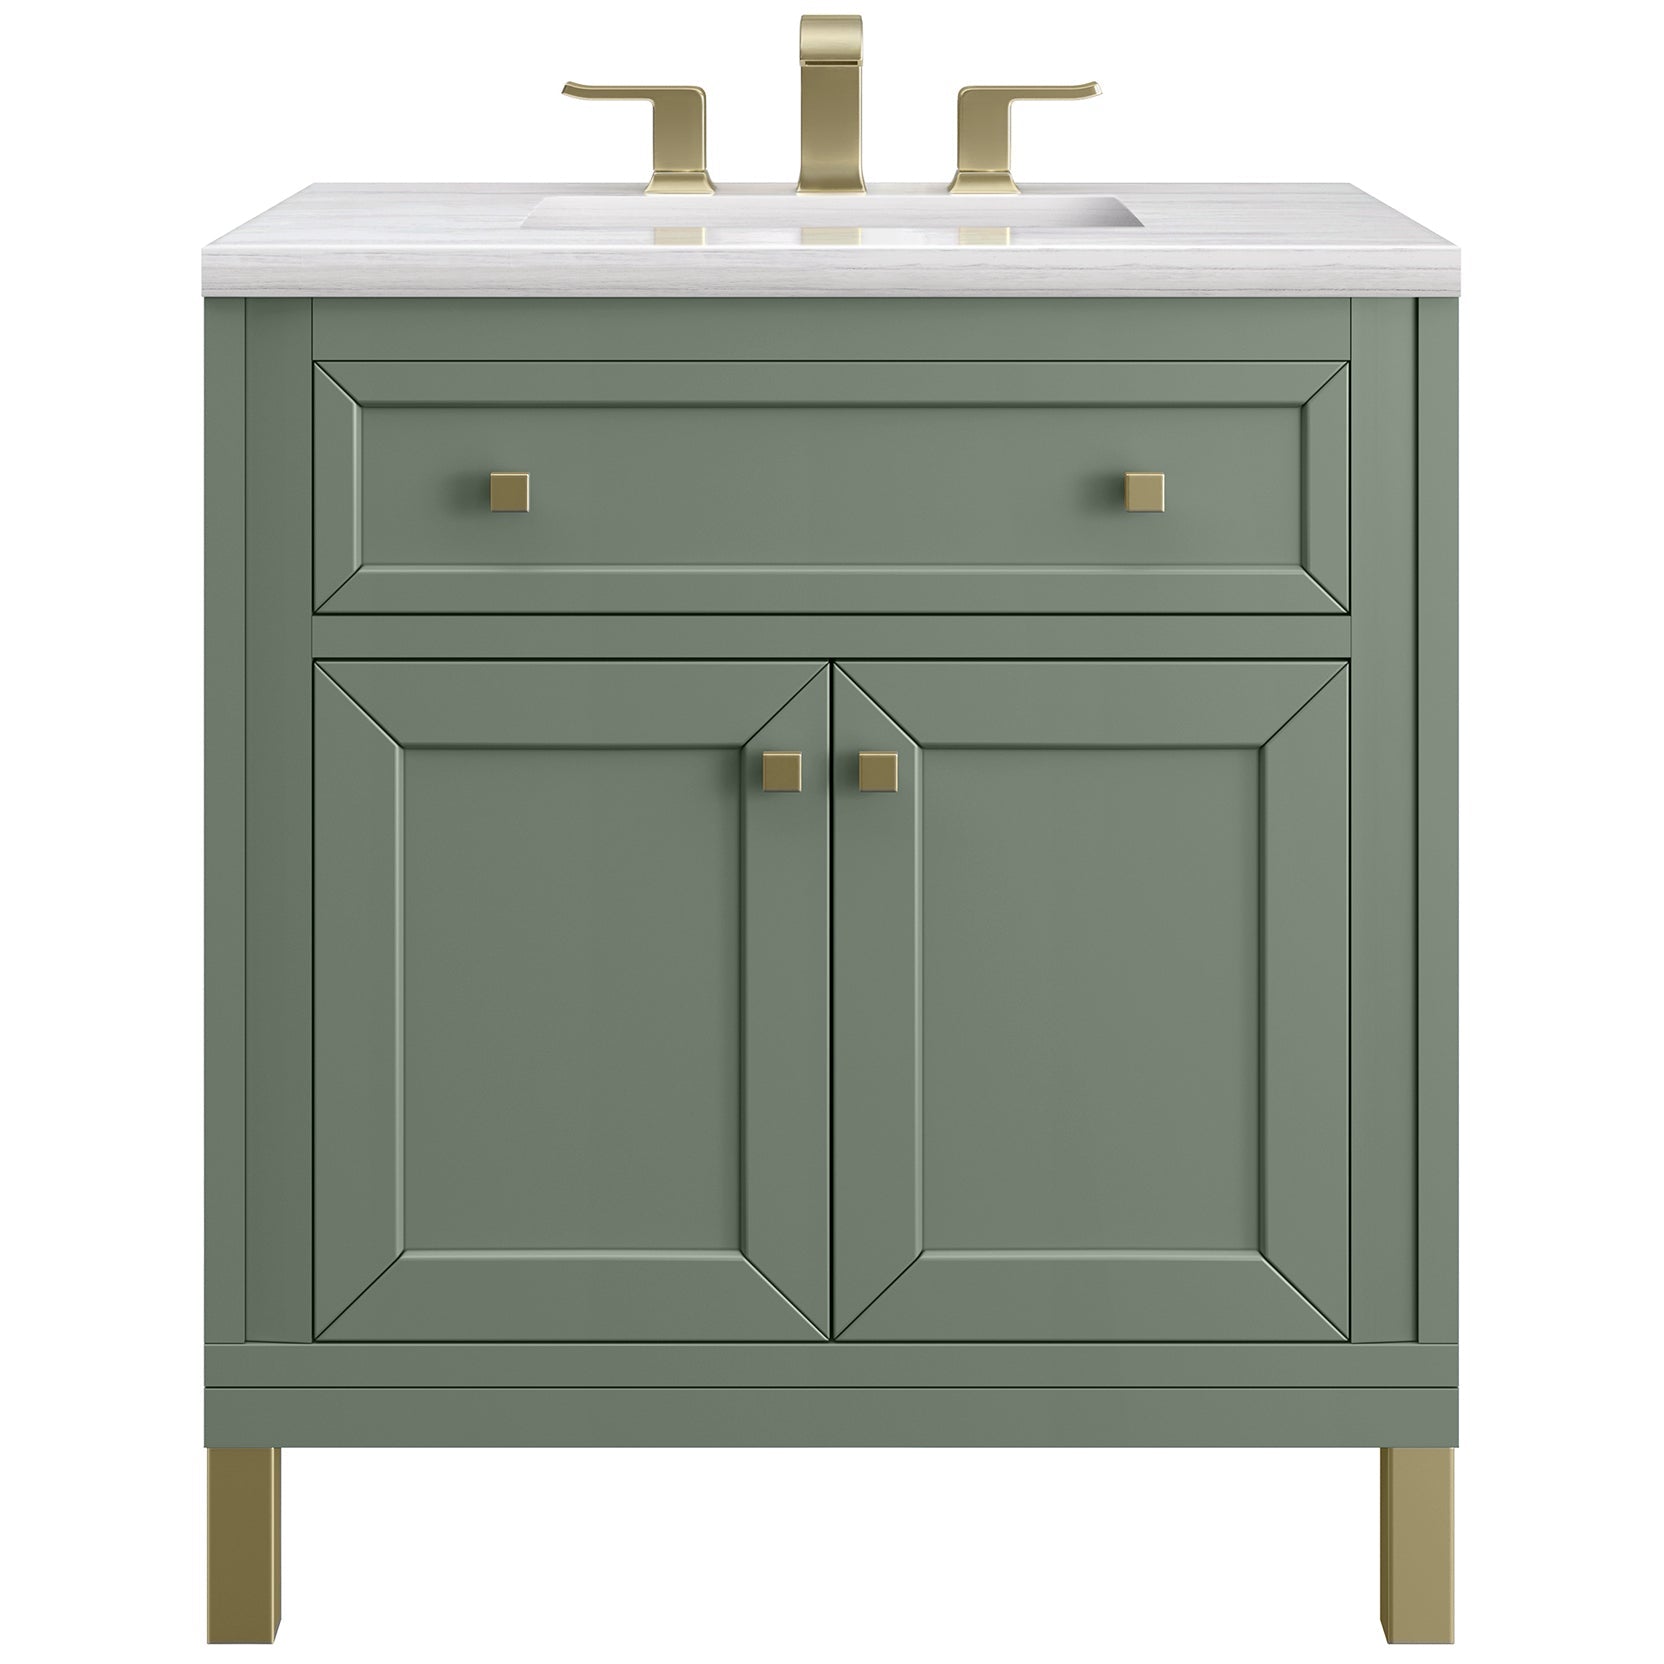 James Martin Vanities Chicago Collection 30 in. Single Vanity in Smokey Celadon with Countertop Options Arctic Fall